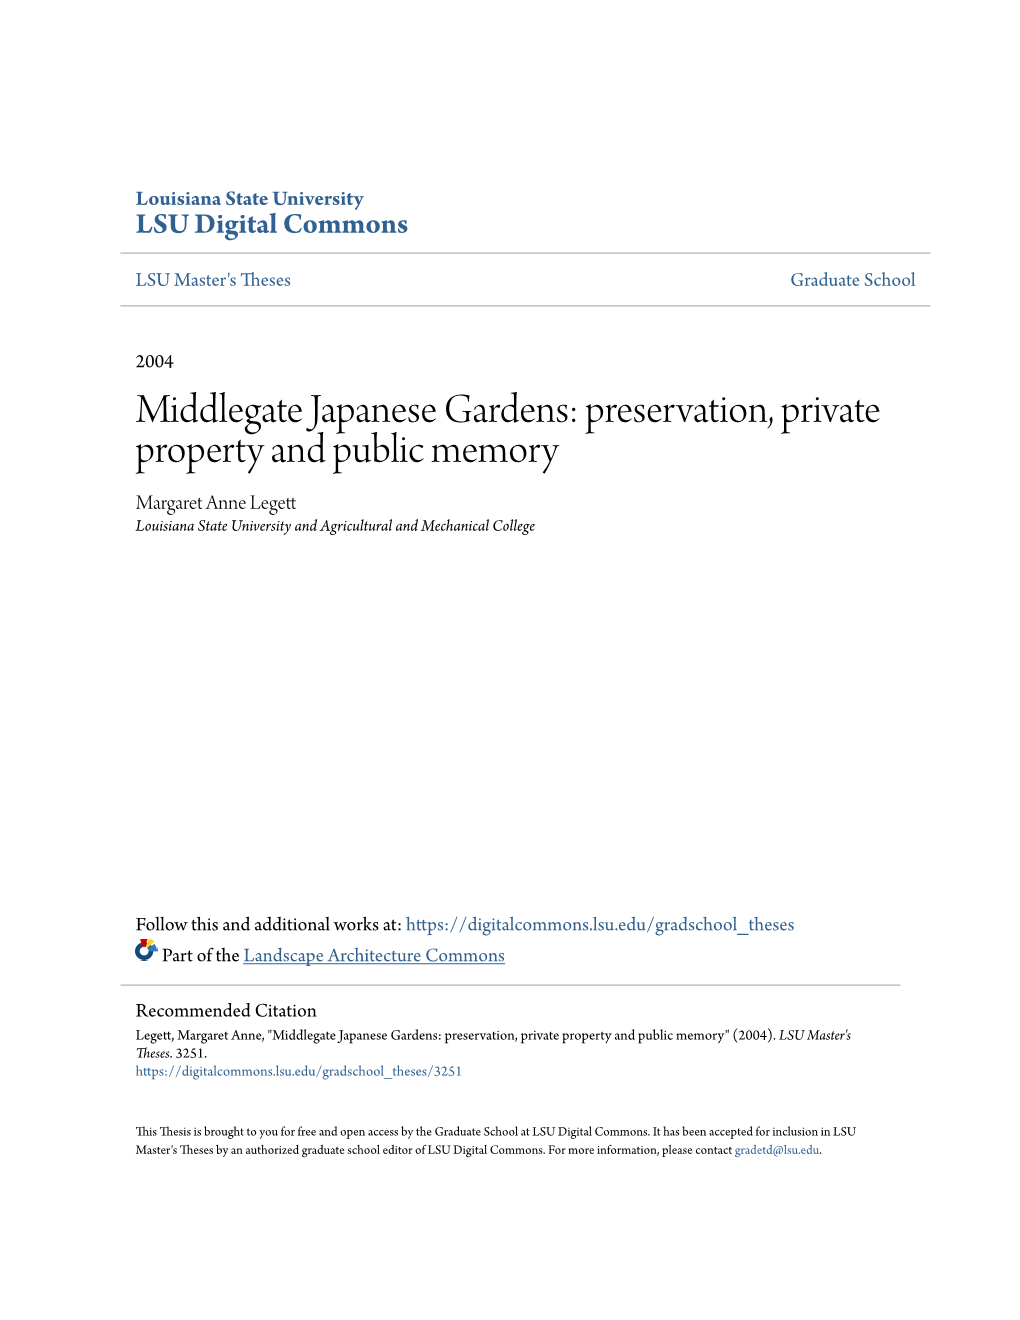 Middlegate Japanese Gardens: Preservation, Private Property and Public Memory Margaret Anne Legett Louisiana State University and Agricultural and Mechanical College